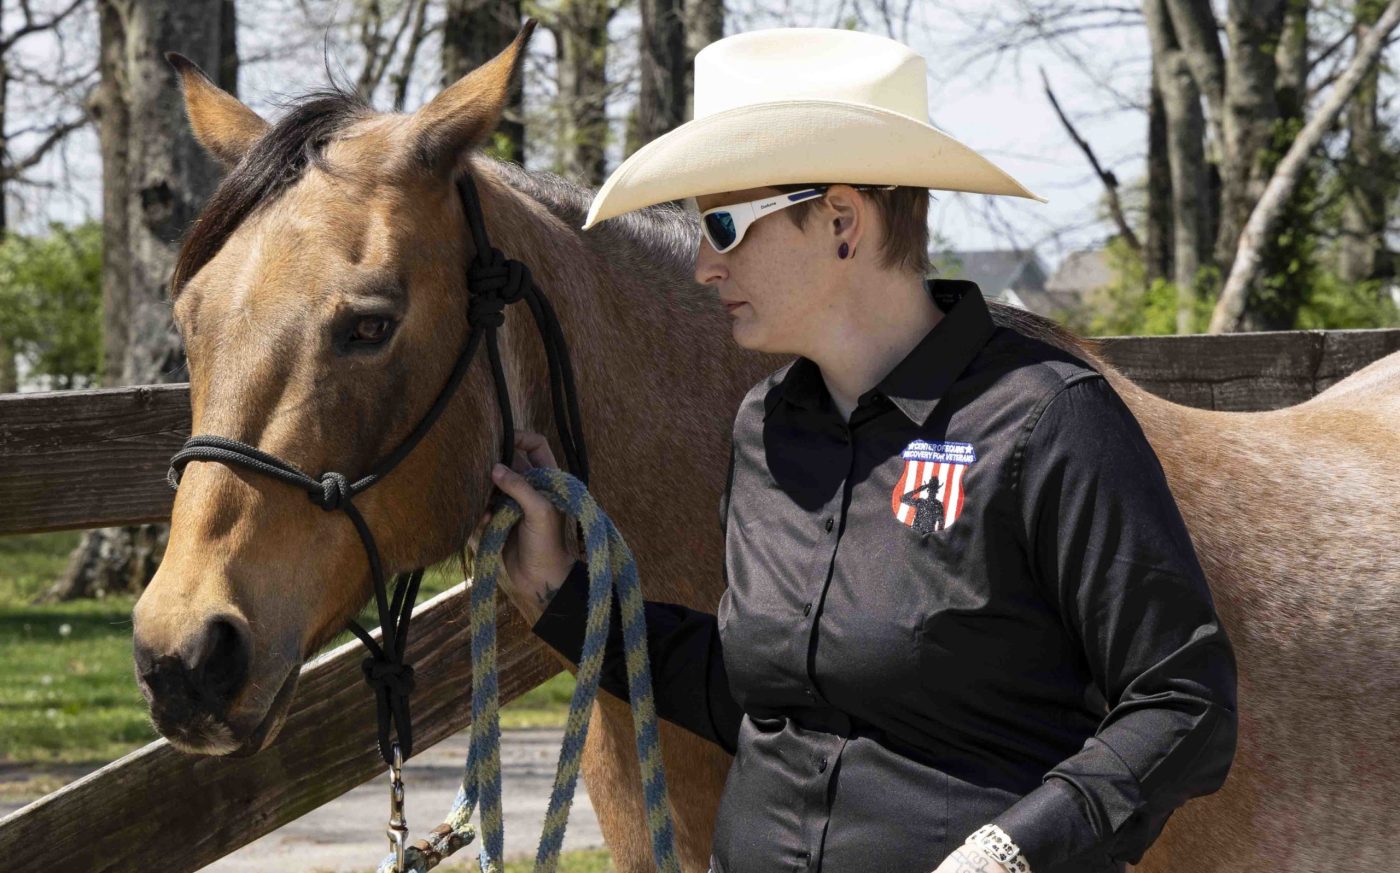 Veterans find healing working with horses